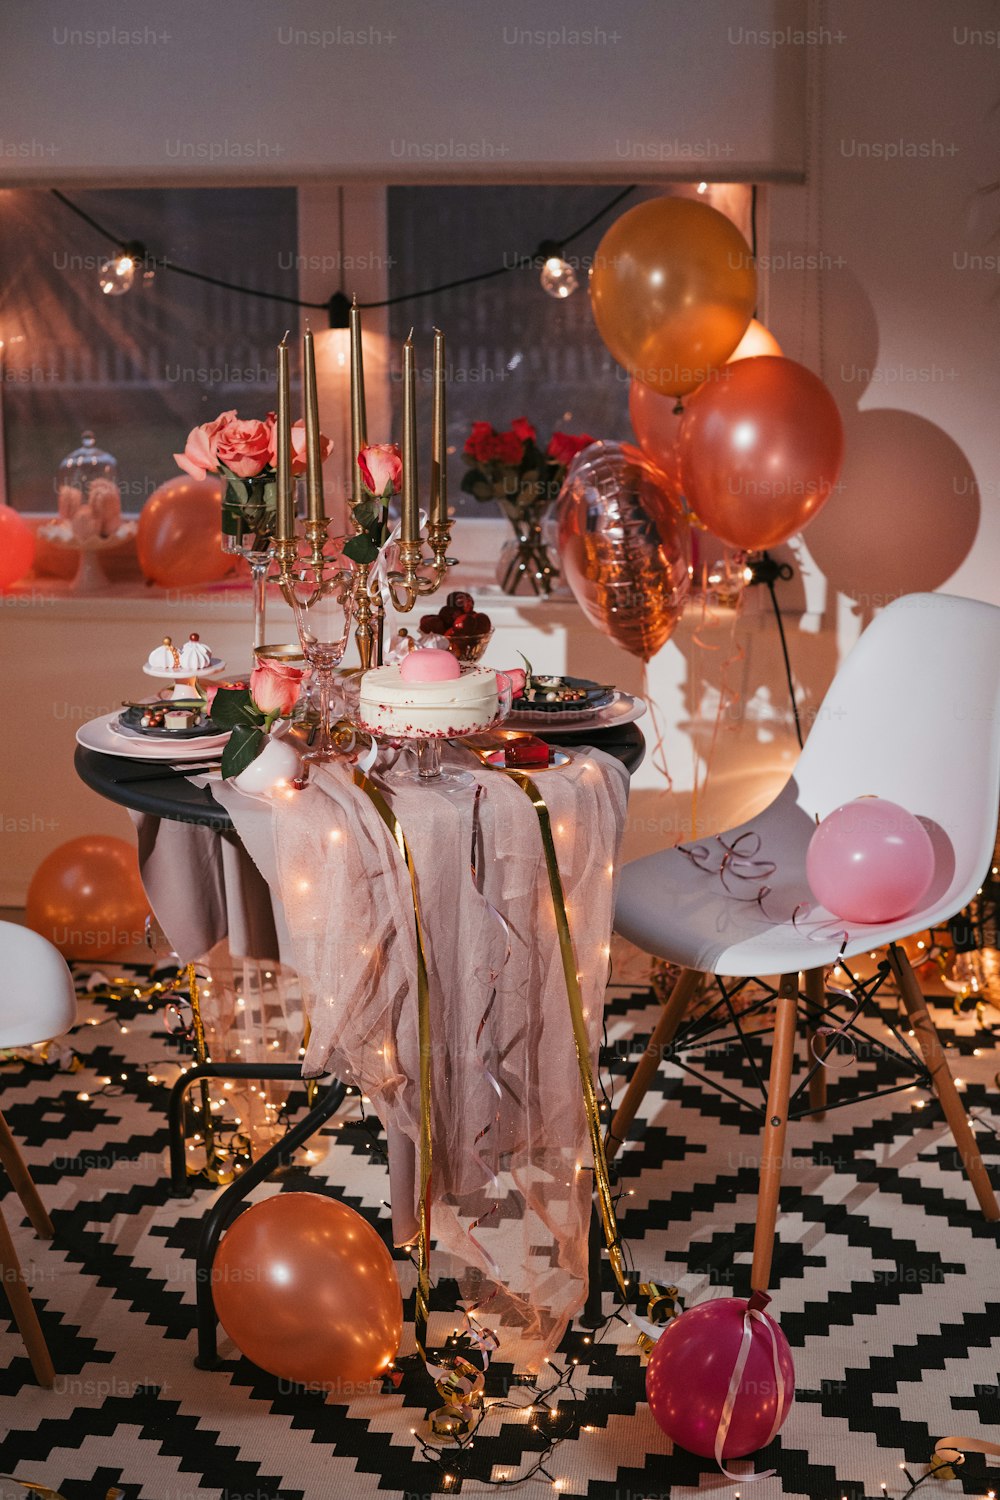 Party Decor Golden Decoration On Black Background With Ballons Stock Photo  - Download Image Now - iStock